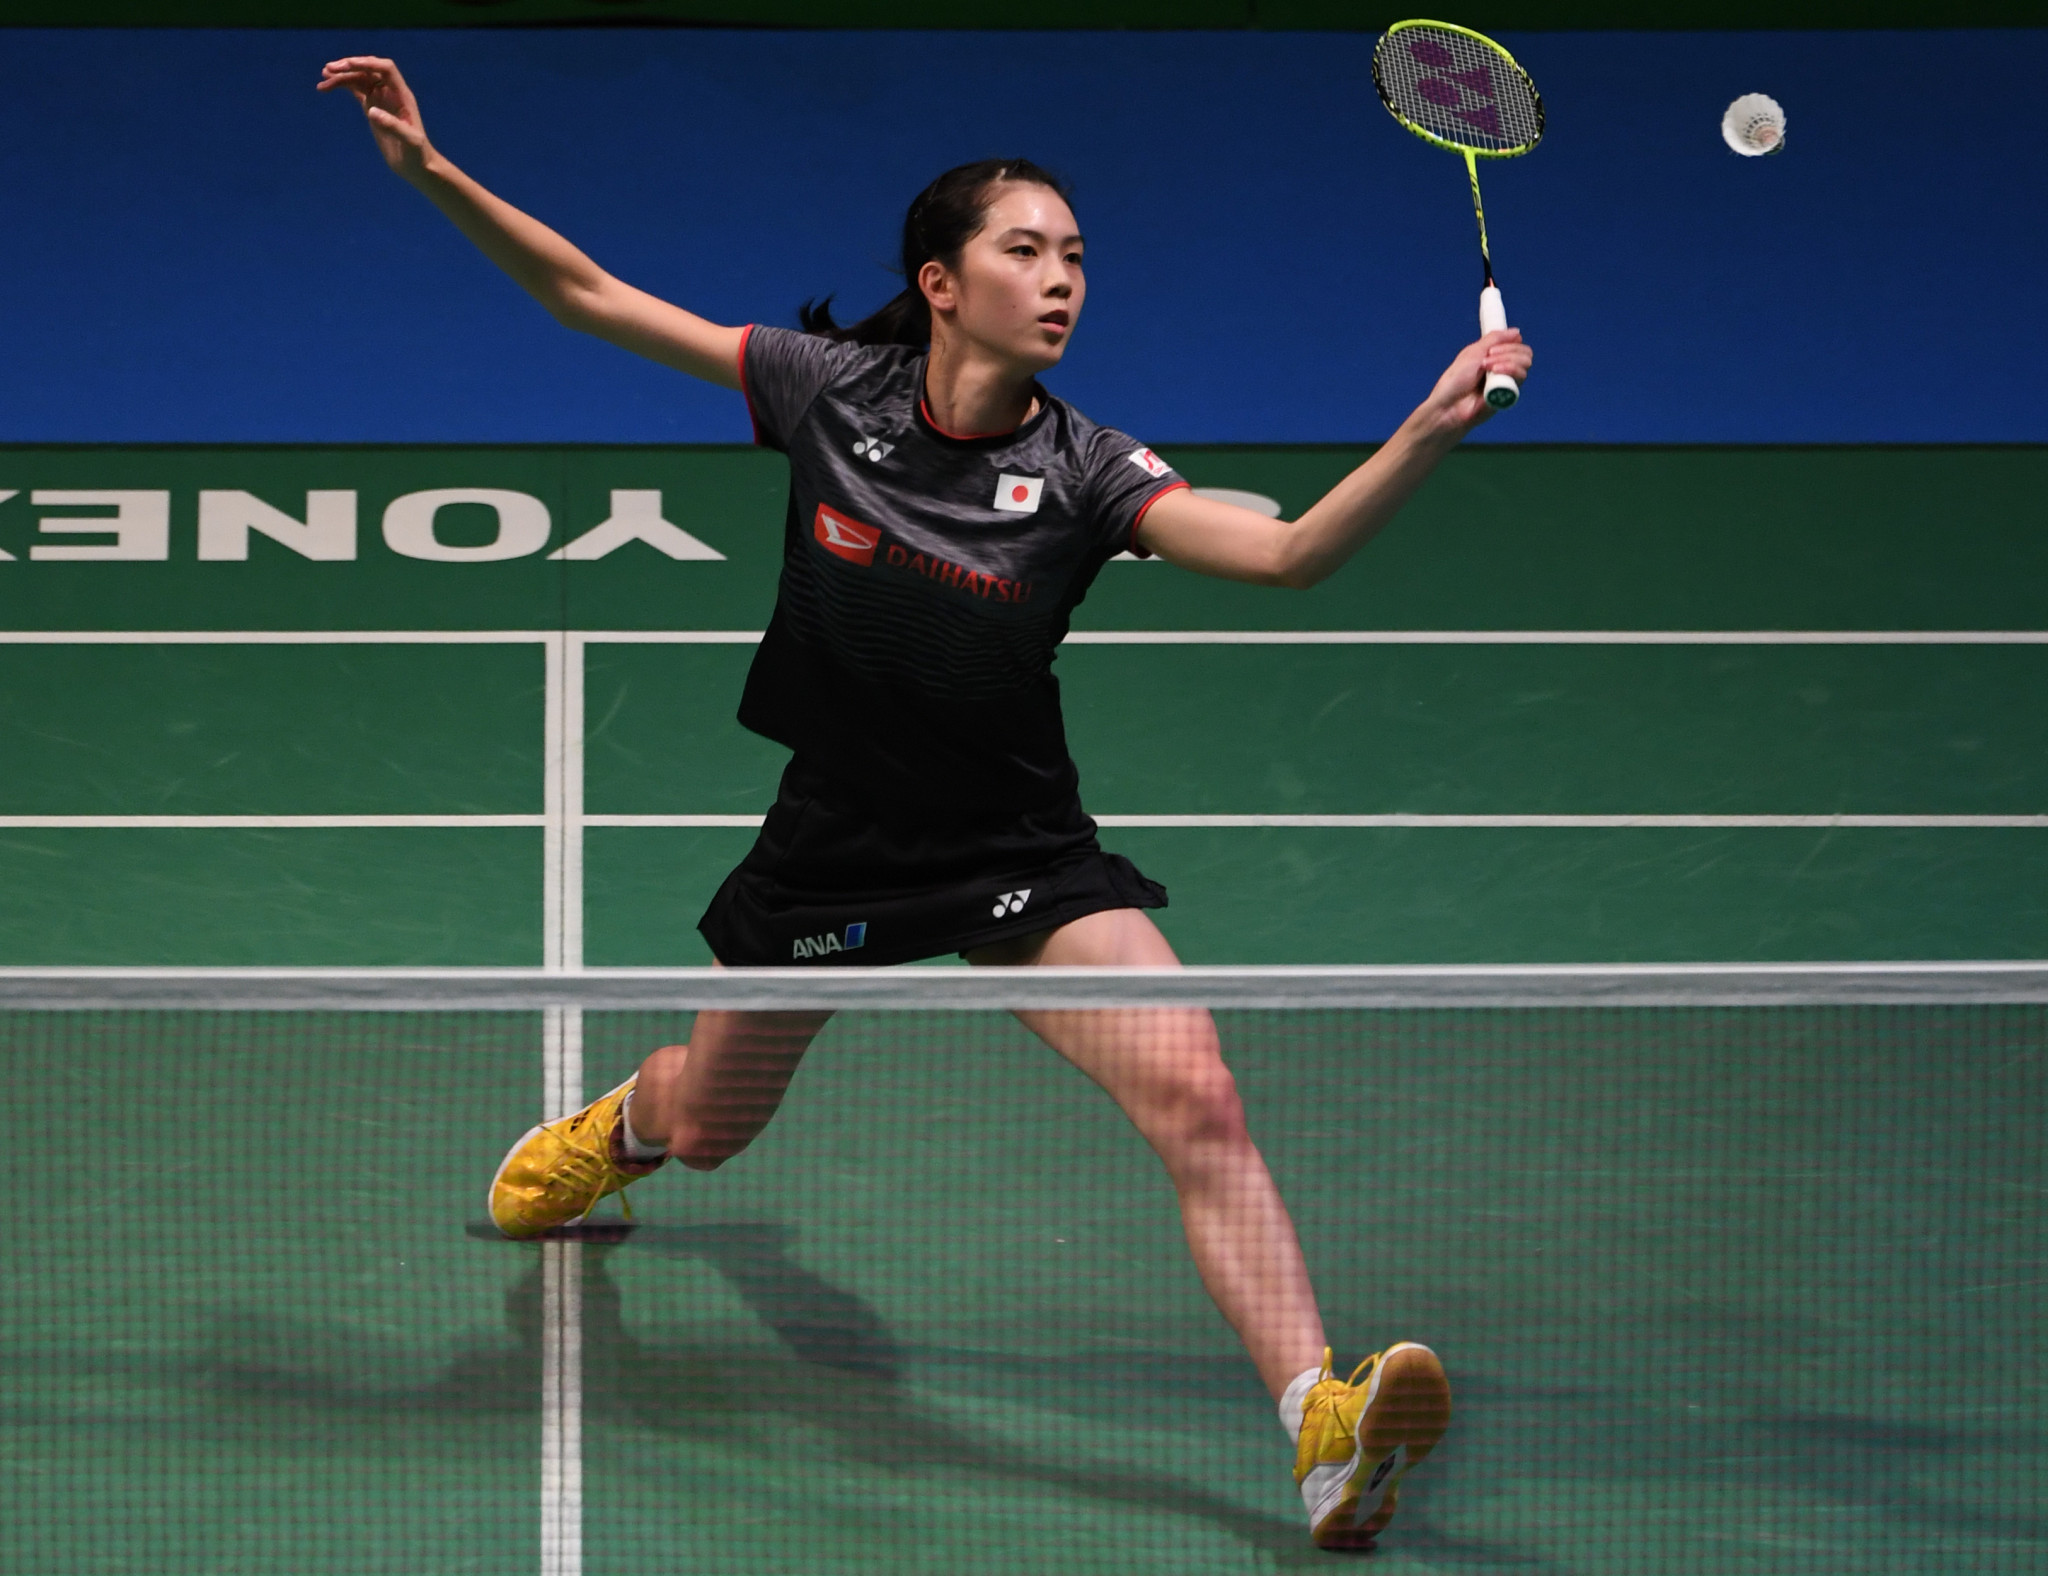 Top seed Aya Ohori safely progressed to the second round of the women's singles event in Macau ©Getty Images